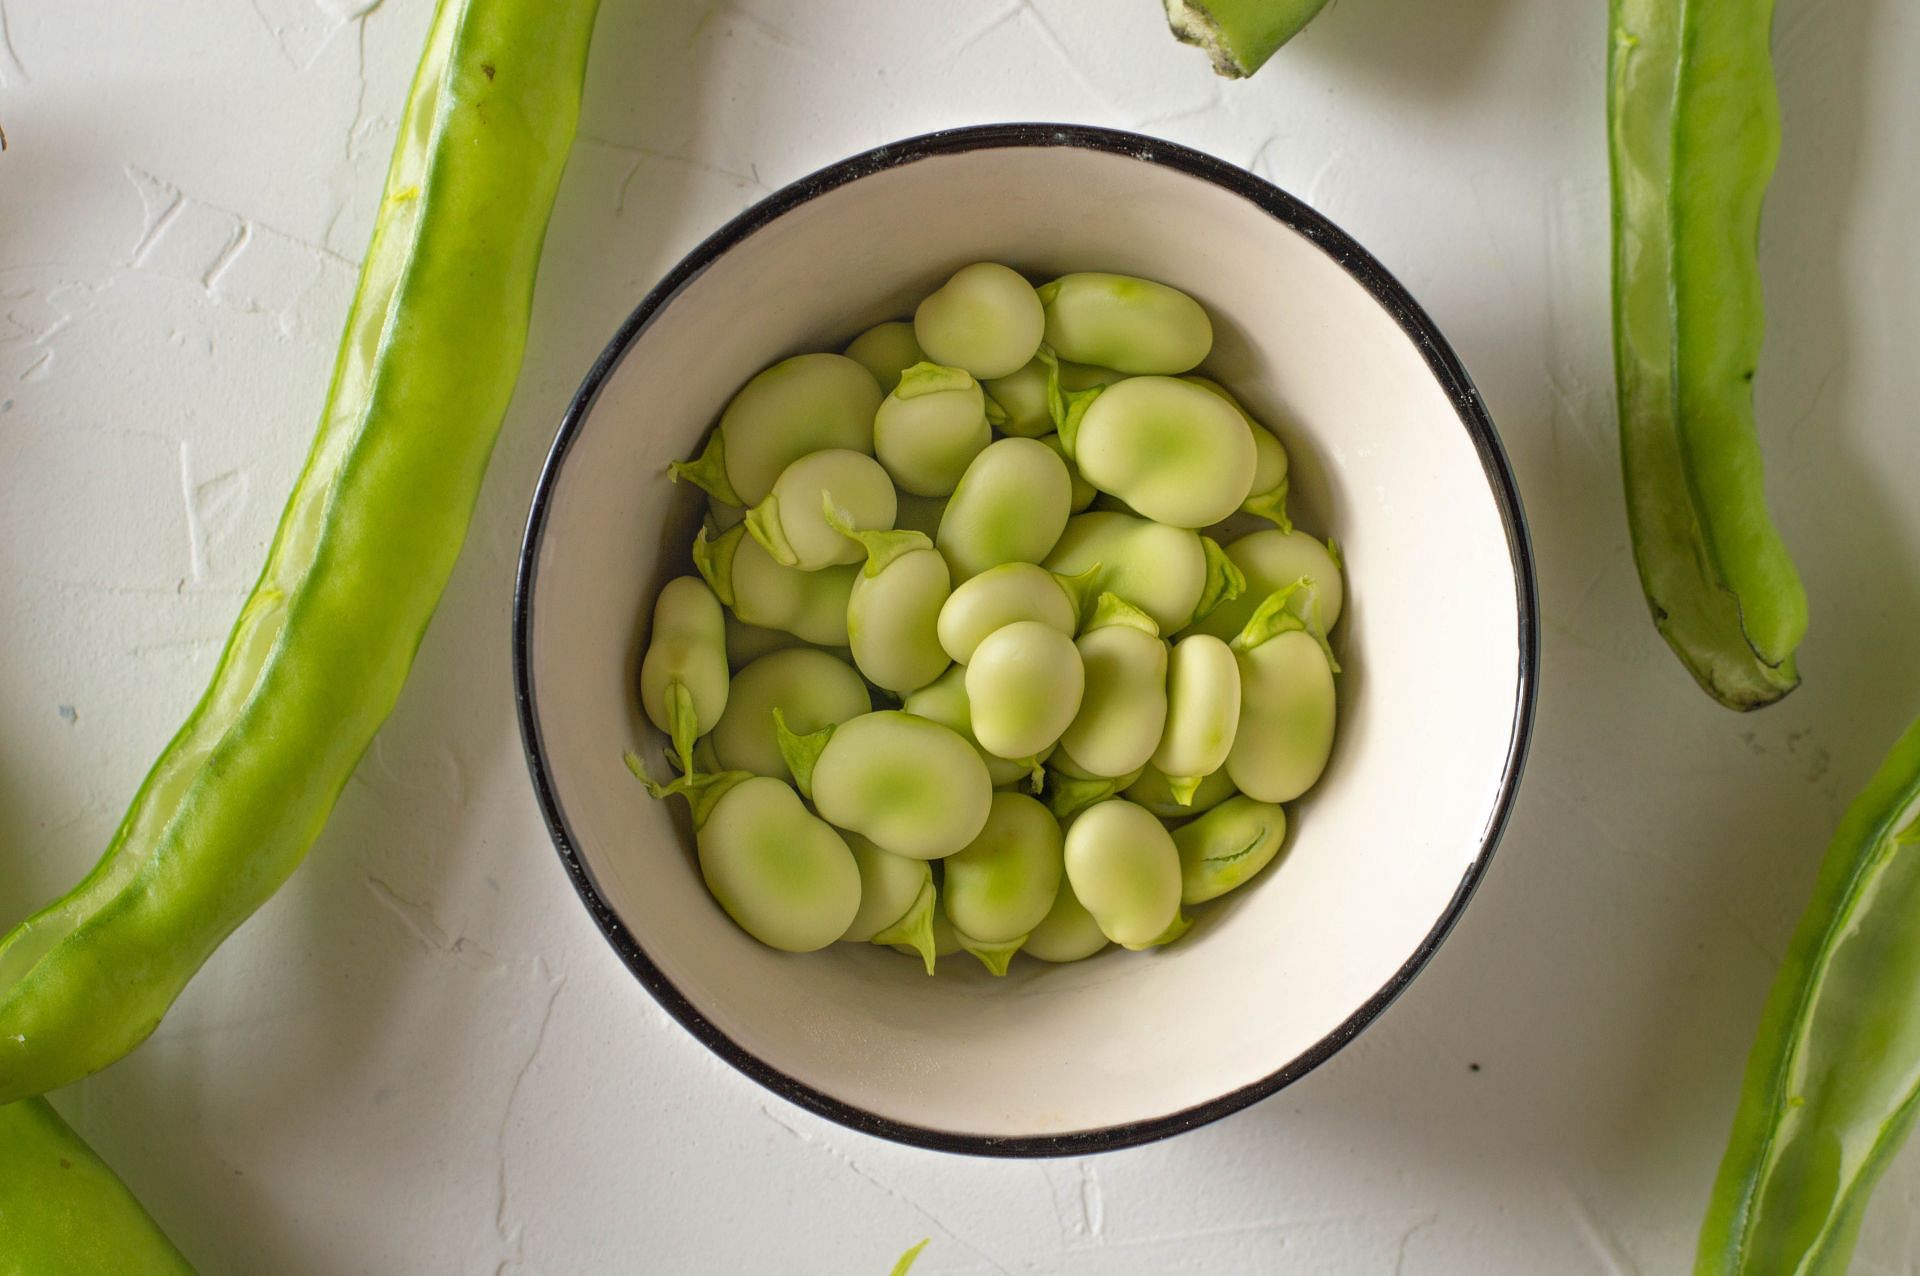 Avoid peas as worst vegetable for weight loss (Image sourced via Pexels / Photo by ilaria)